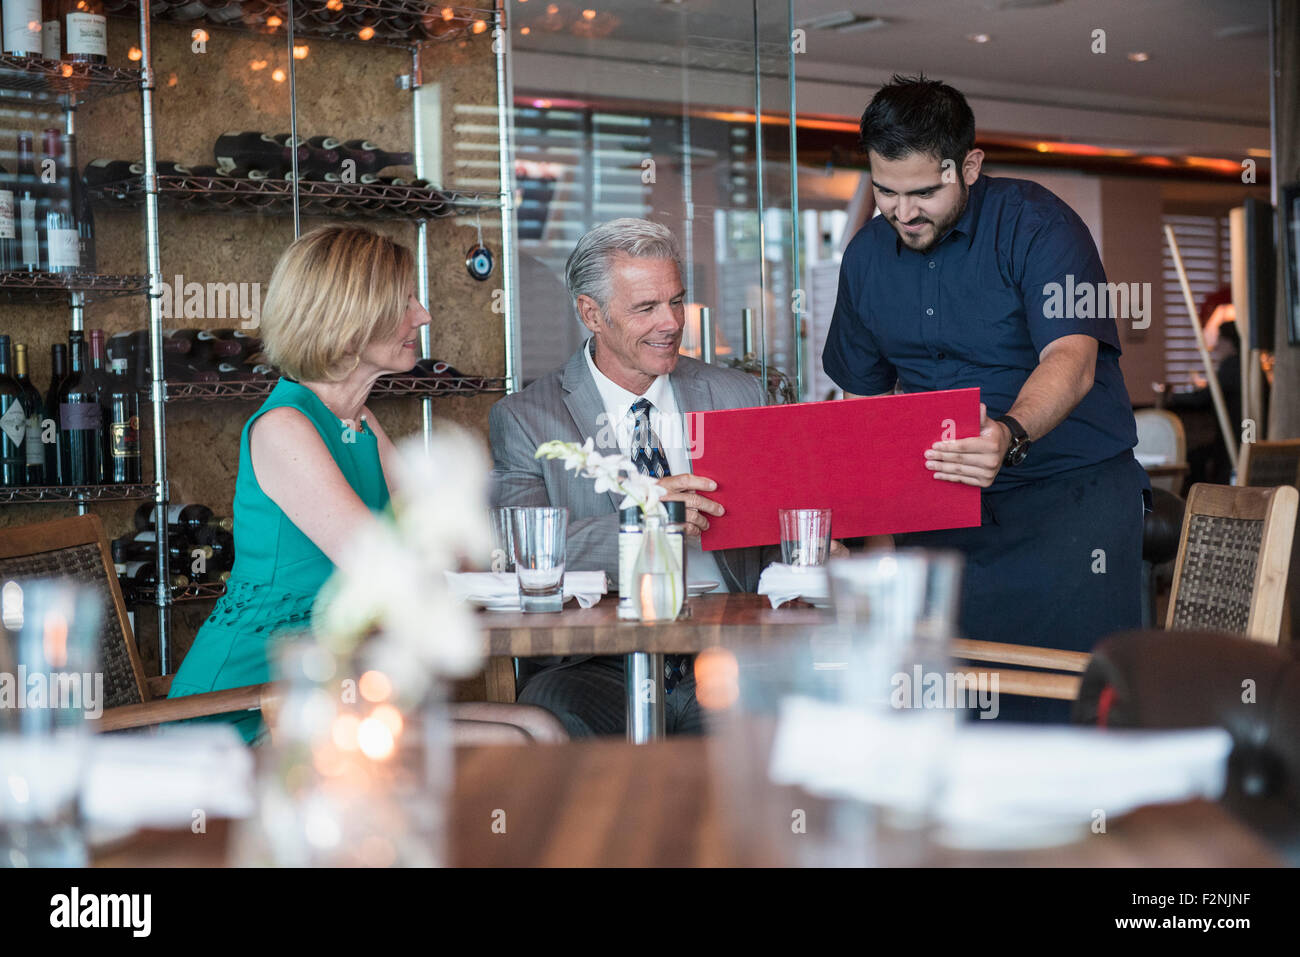 Waiter assisting couple with menu in restaurant Stock Photo